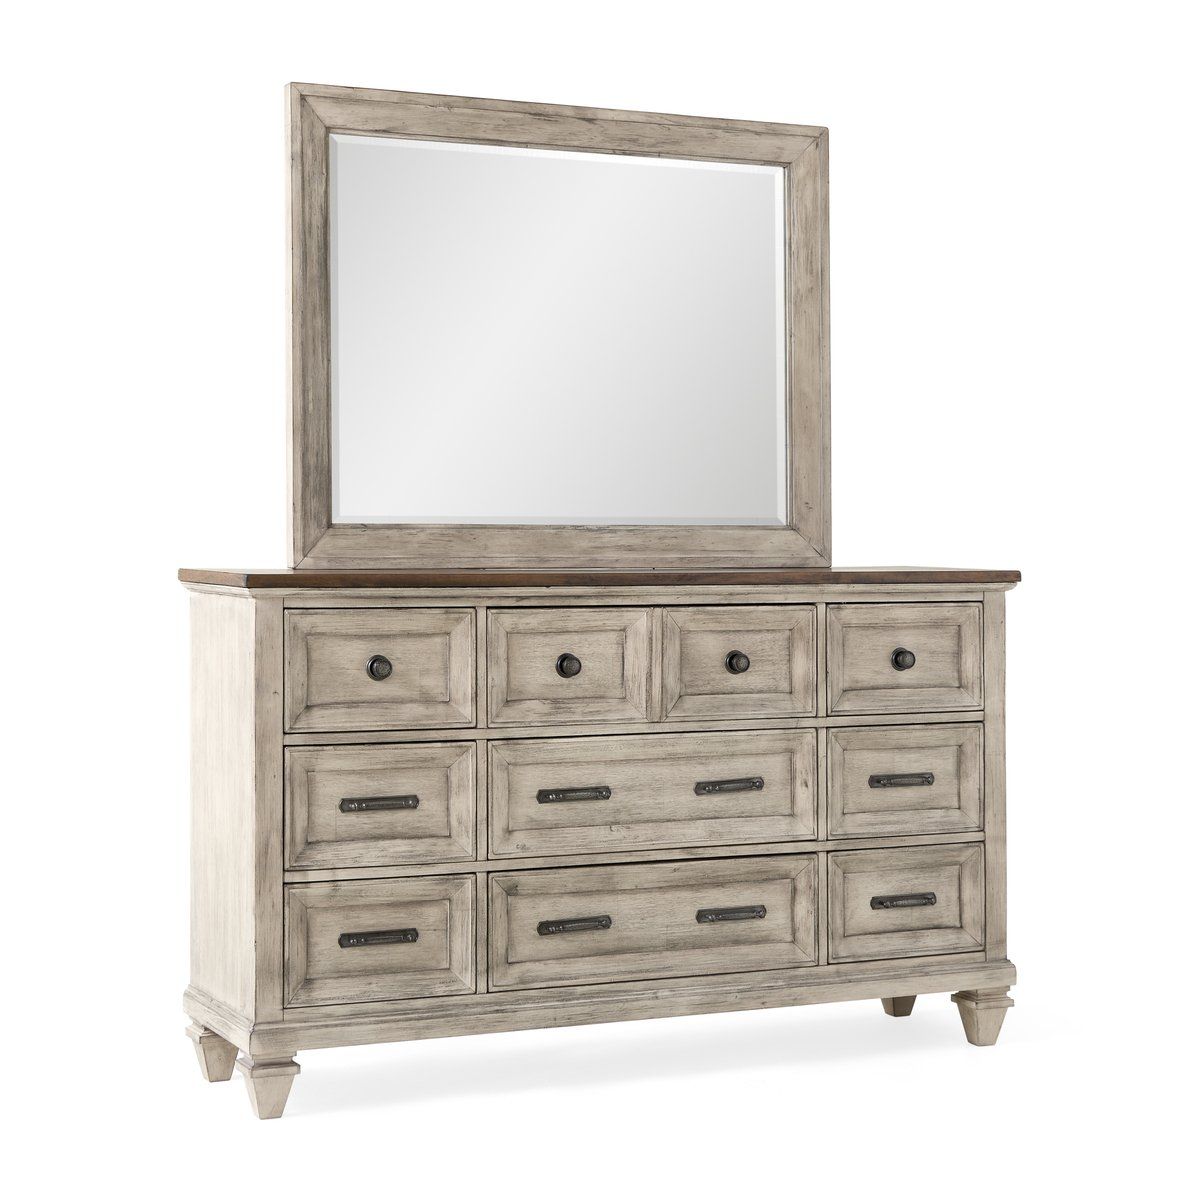 Picture of Mariana Creme Dresser and Mirror Set